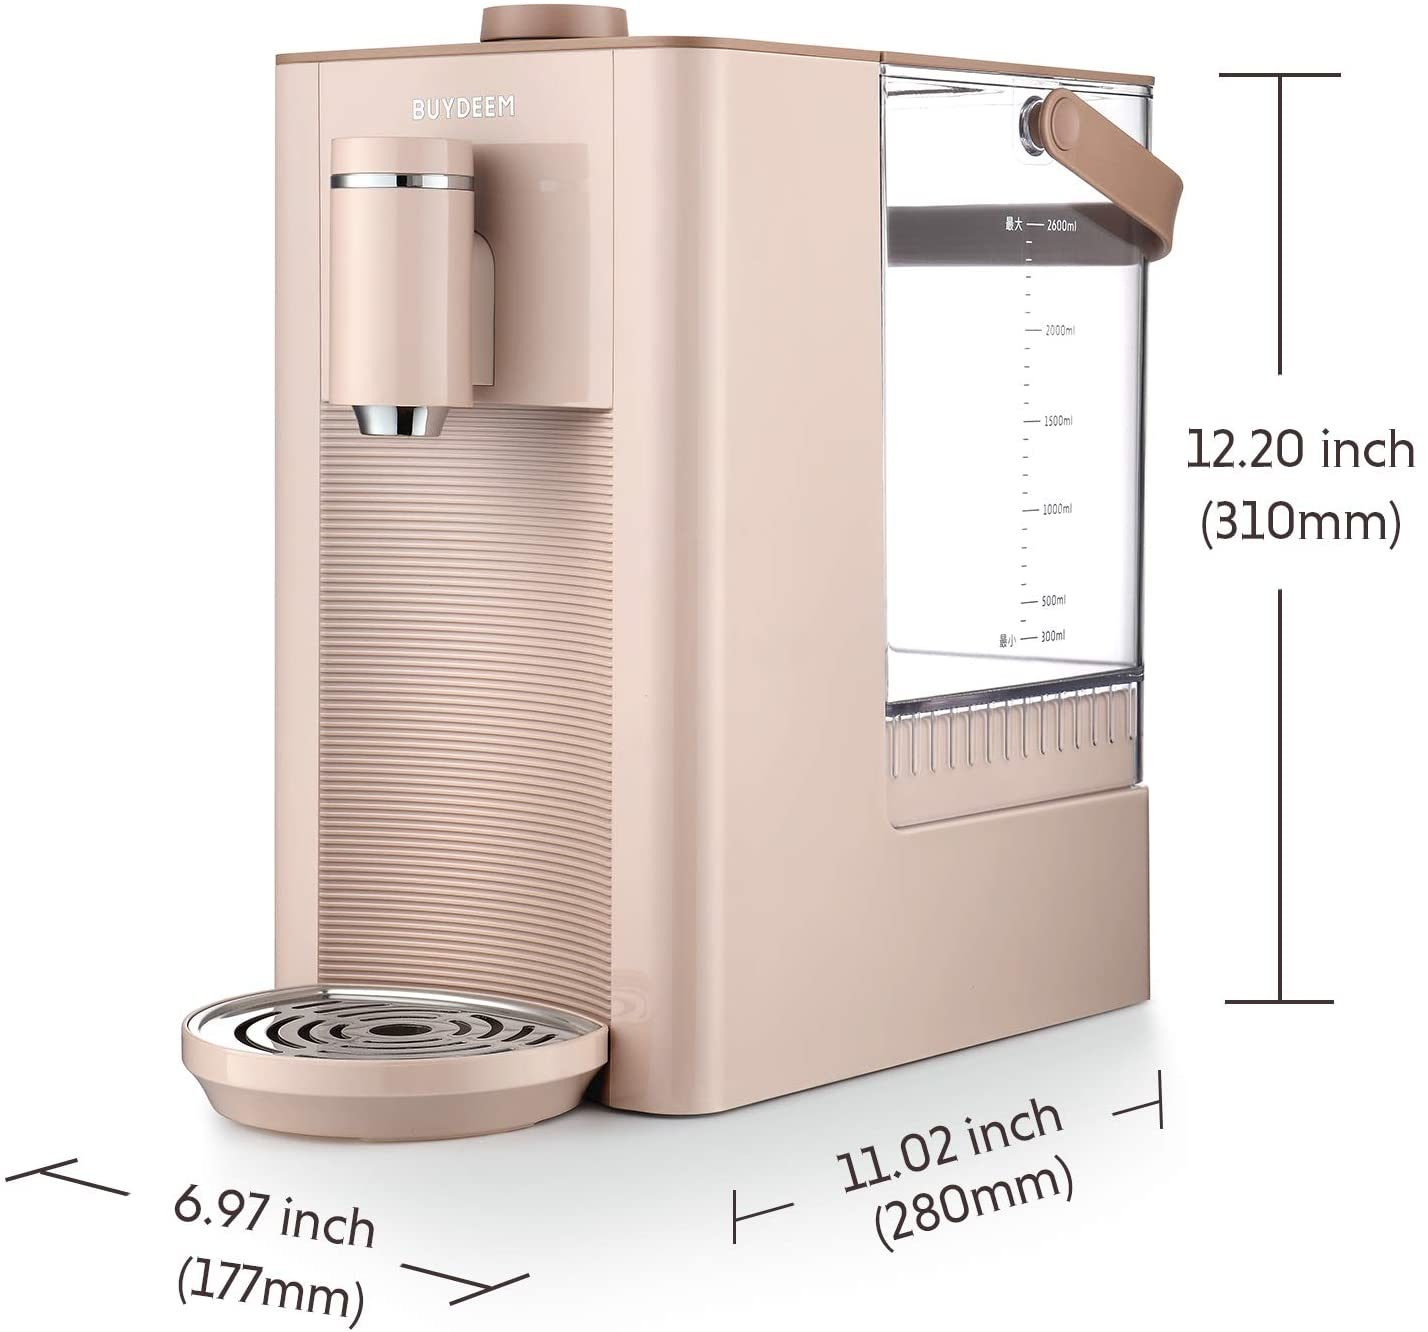 Electric Hot Water Boiler and Warmer